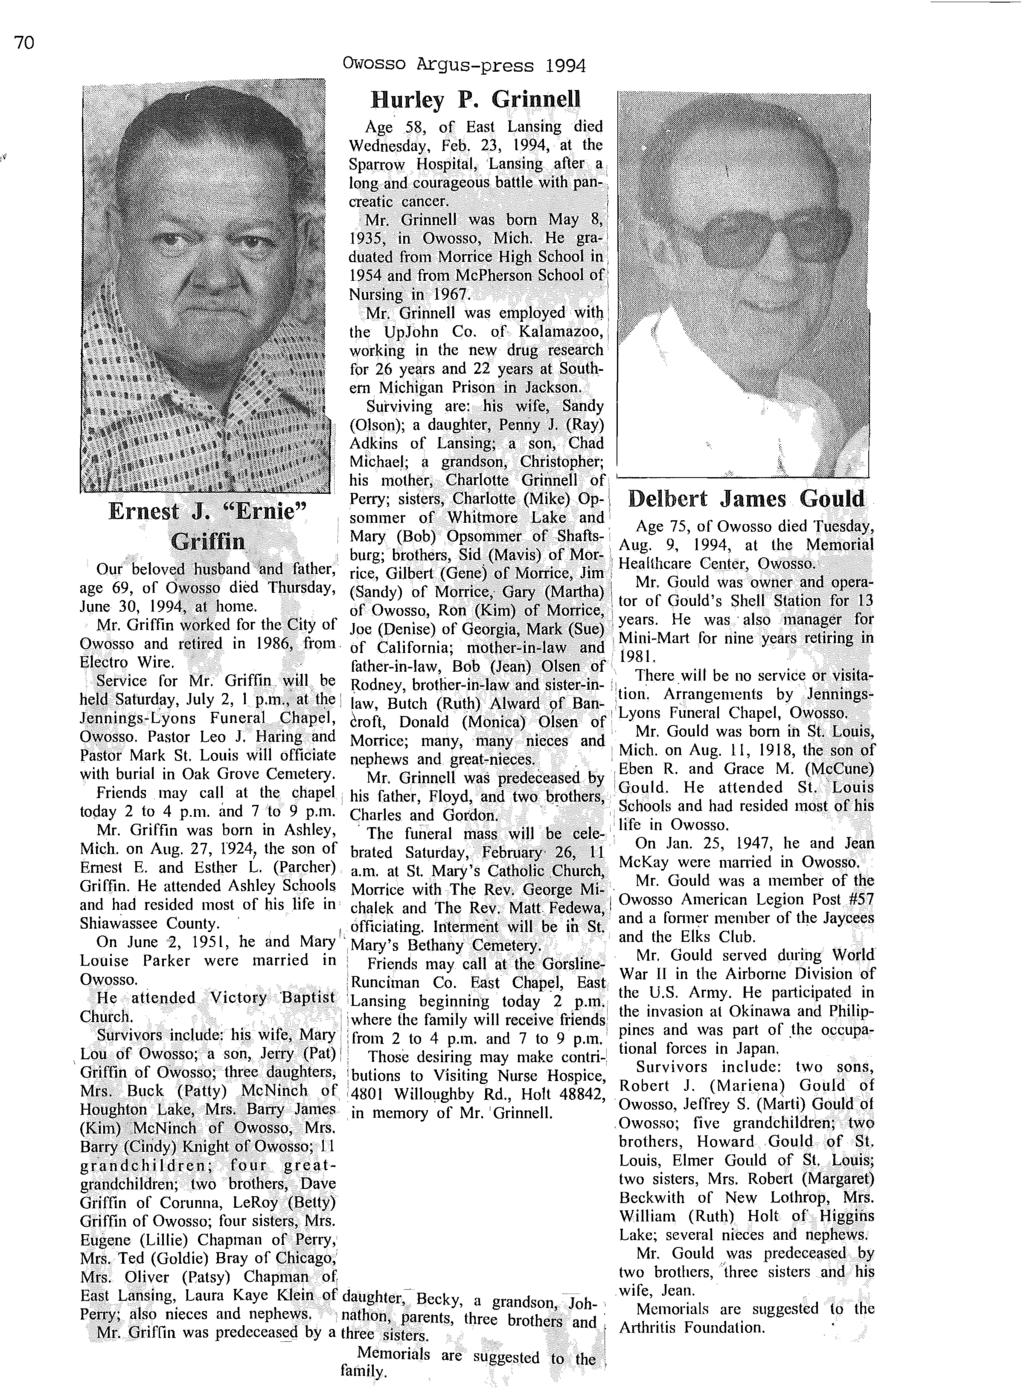 70 Ernest J. "Ernie" Griffin. Owosso Argus-press 1994 Hurley P. Grinnell Age 58, of East Lansing died Wednesday, Feb. 23, 1994, at the Sparrow Hospital, 'Lansing.